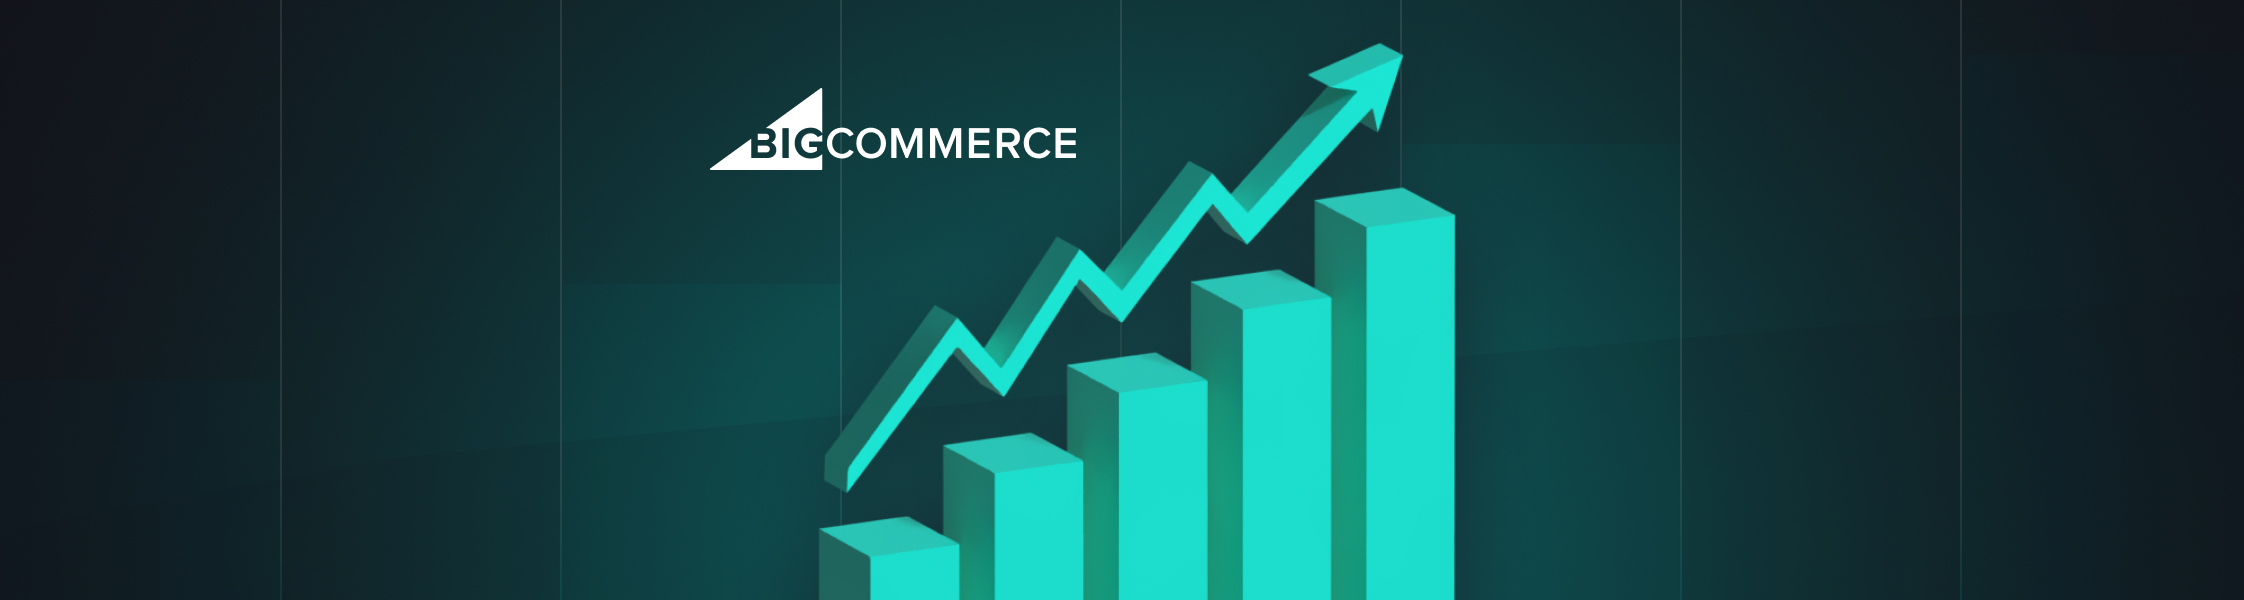 How to Increase Ecommerce Traffic for Your Online Store